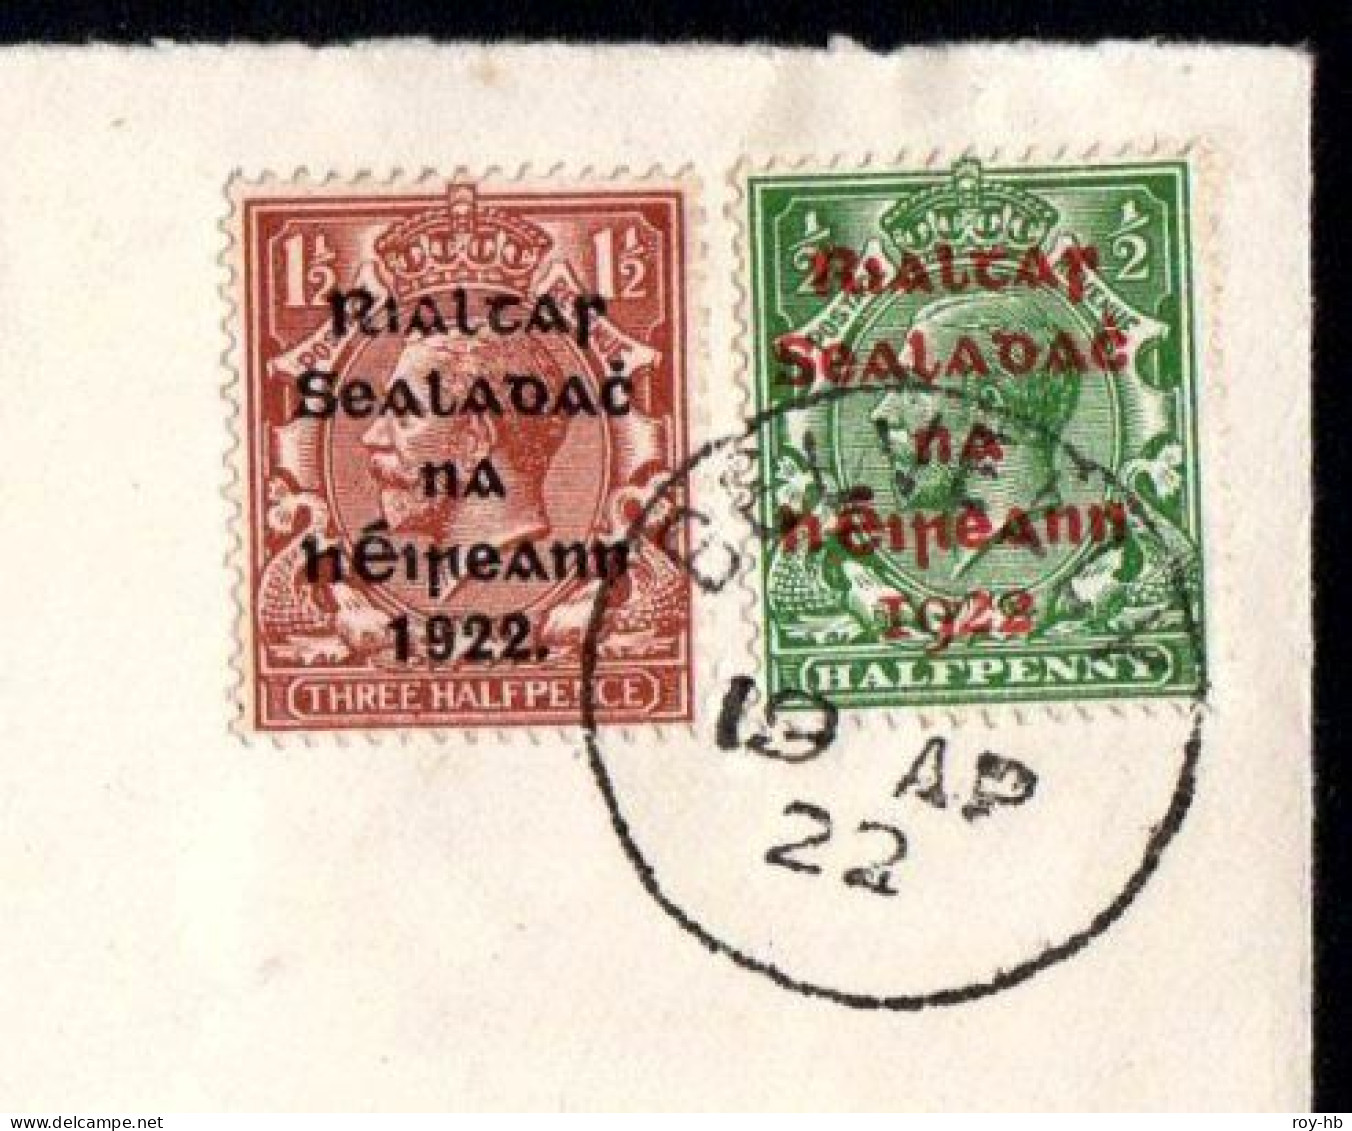 1922 ½d With Red Overprint Used On Cover With Thom 1½d Black To Make Up The Correct 2d Rate On A Cover To Yorkshire - Covers & Documents